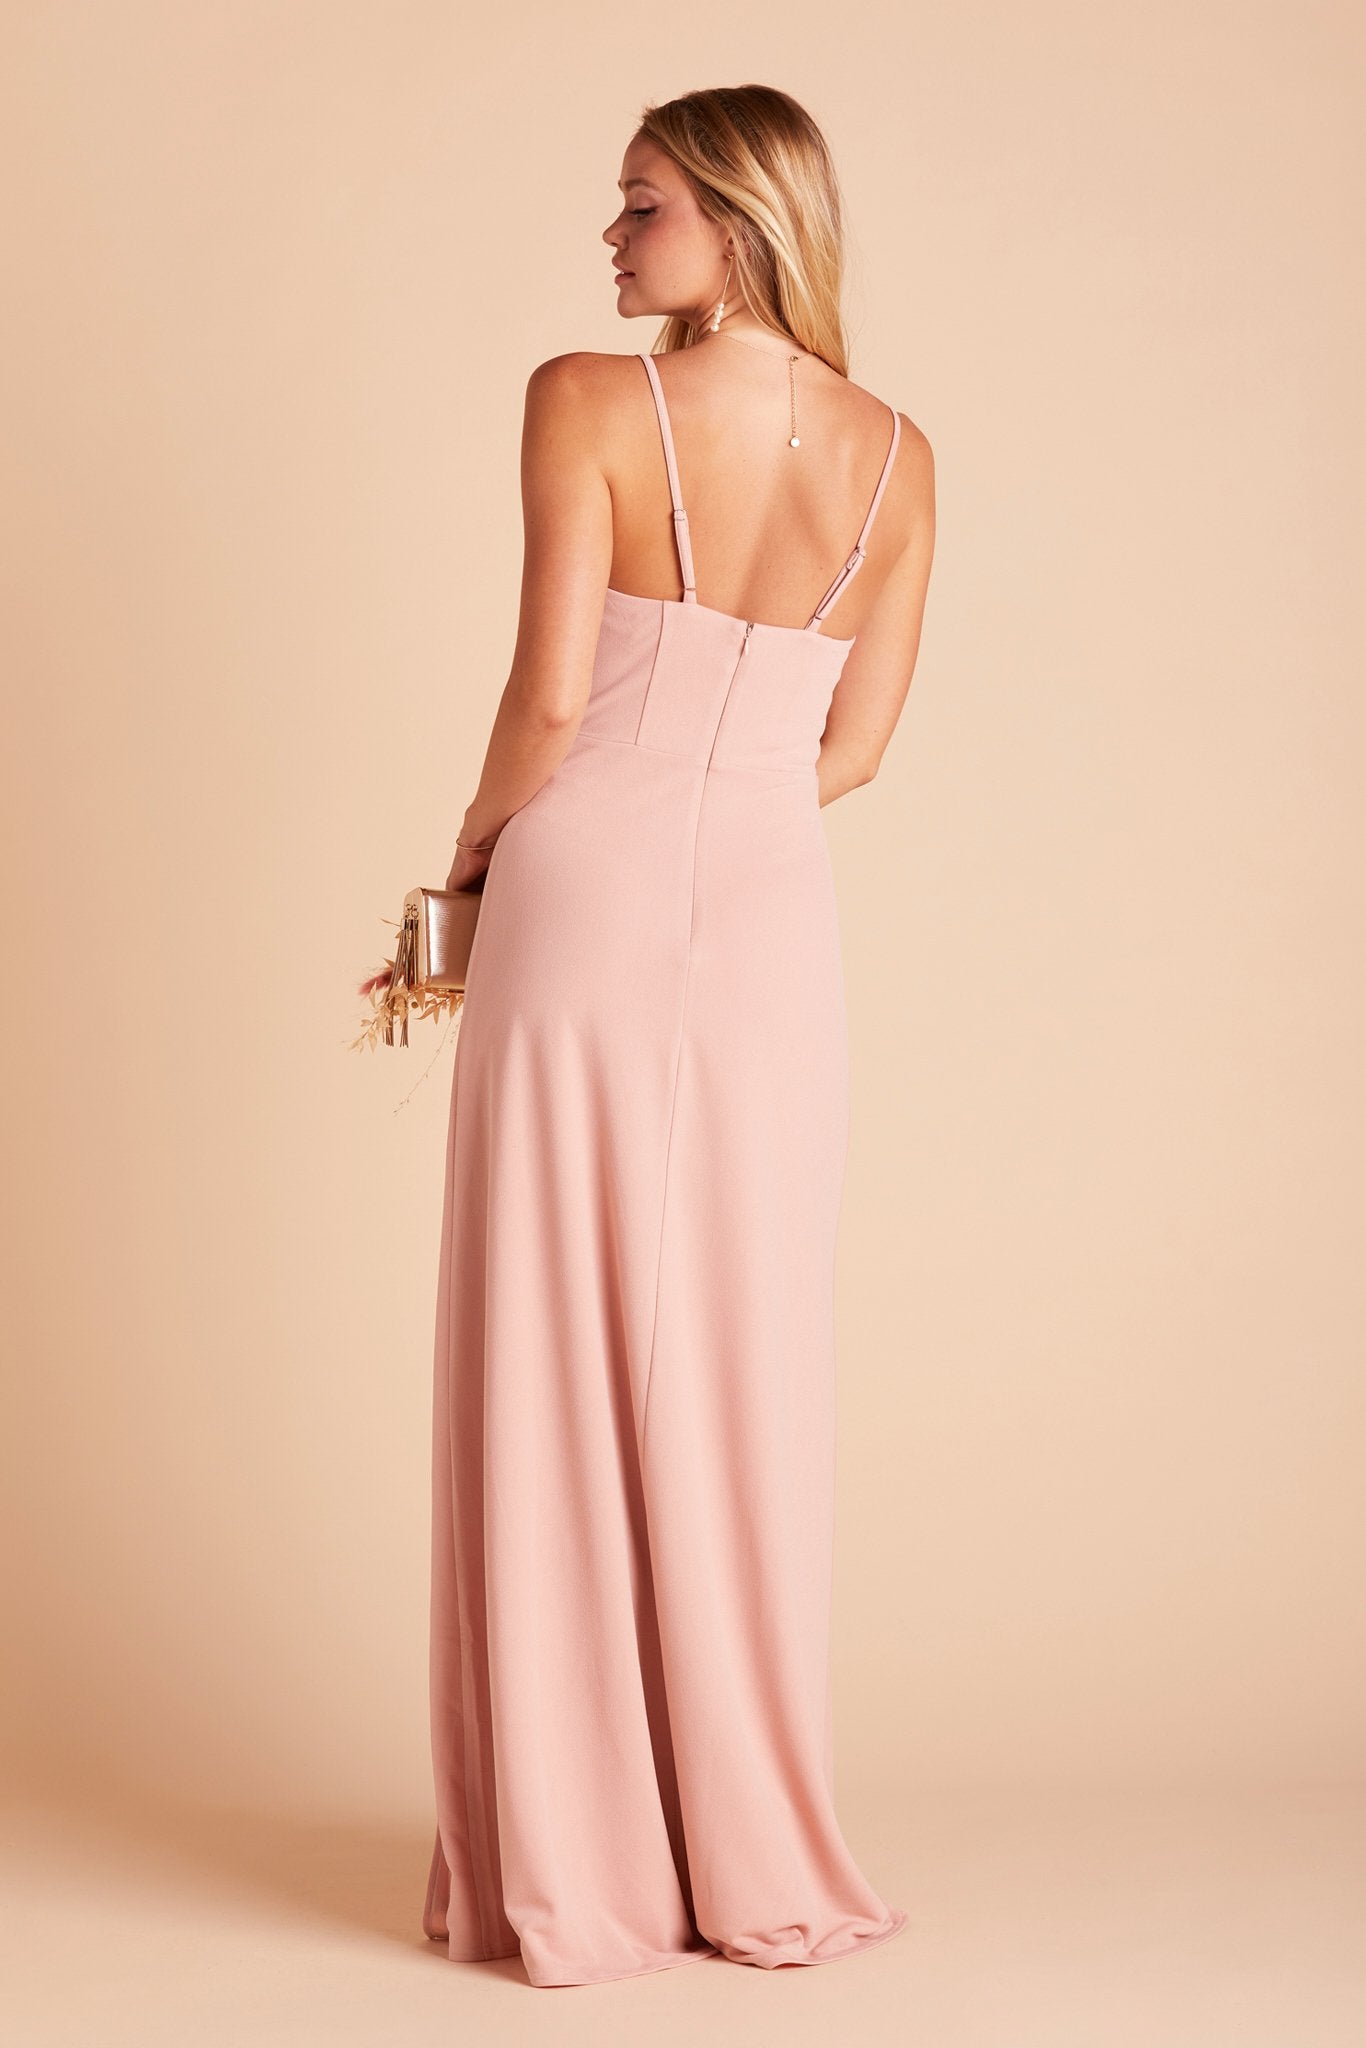 Back view of the Ash Bridesmaid Dress in dusty rose crepe shows skinny adjustable straps as well as an open back just below shoulder blades.